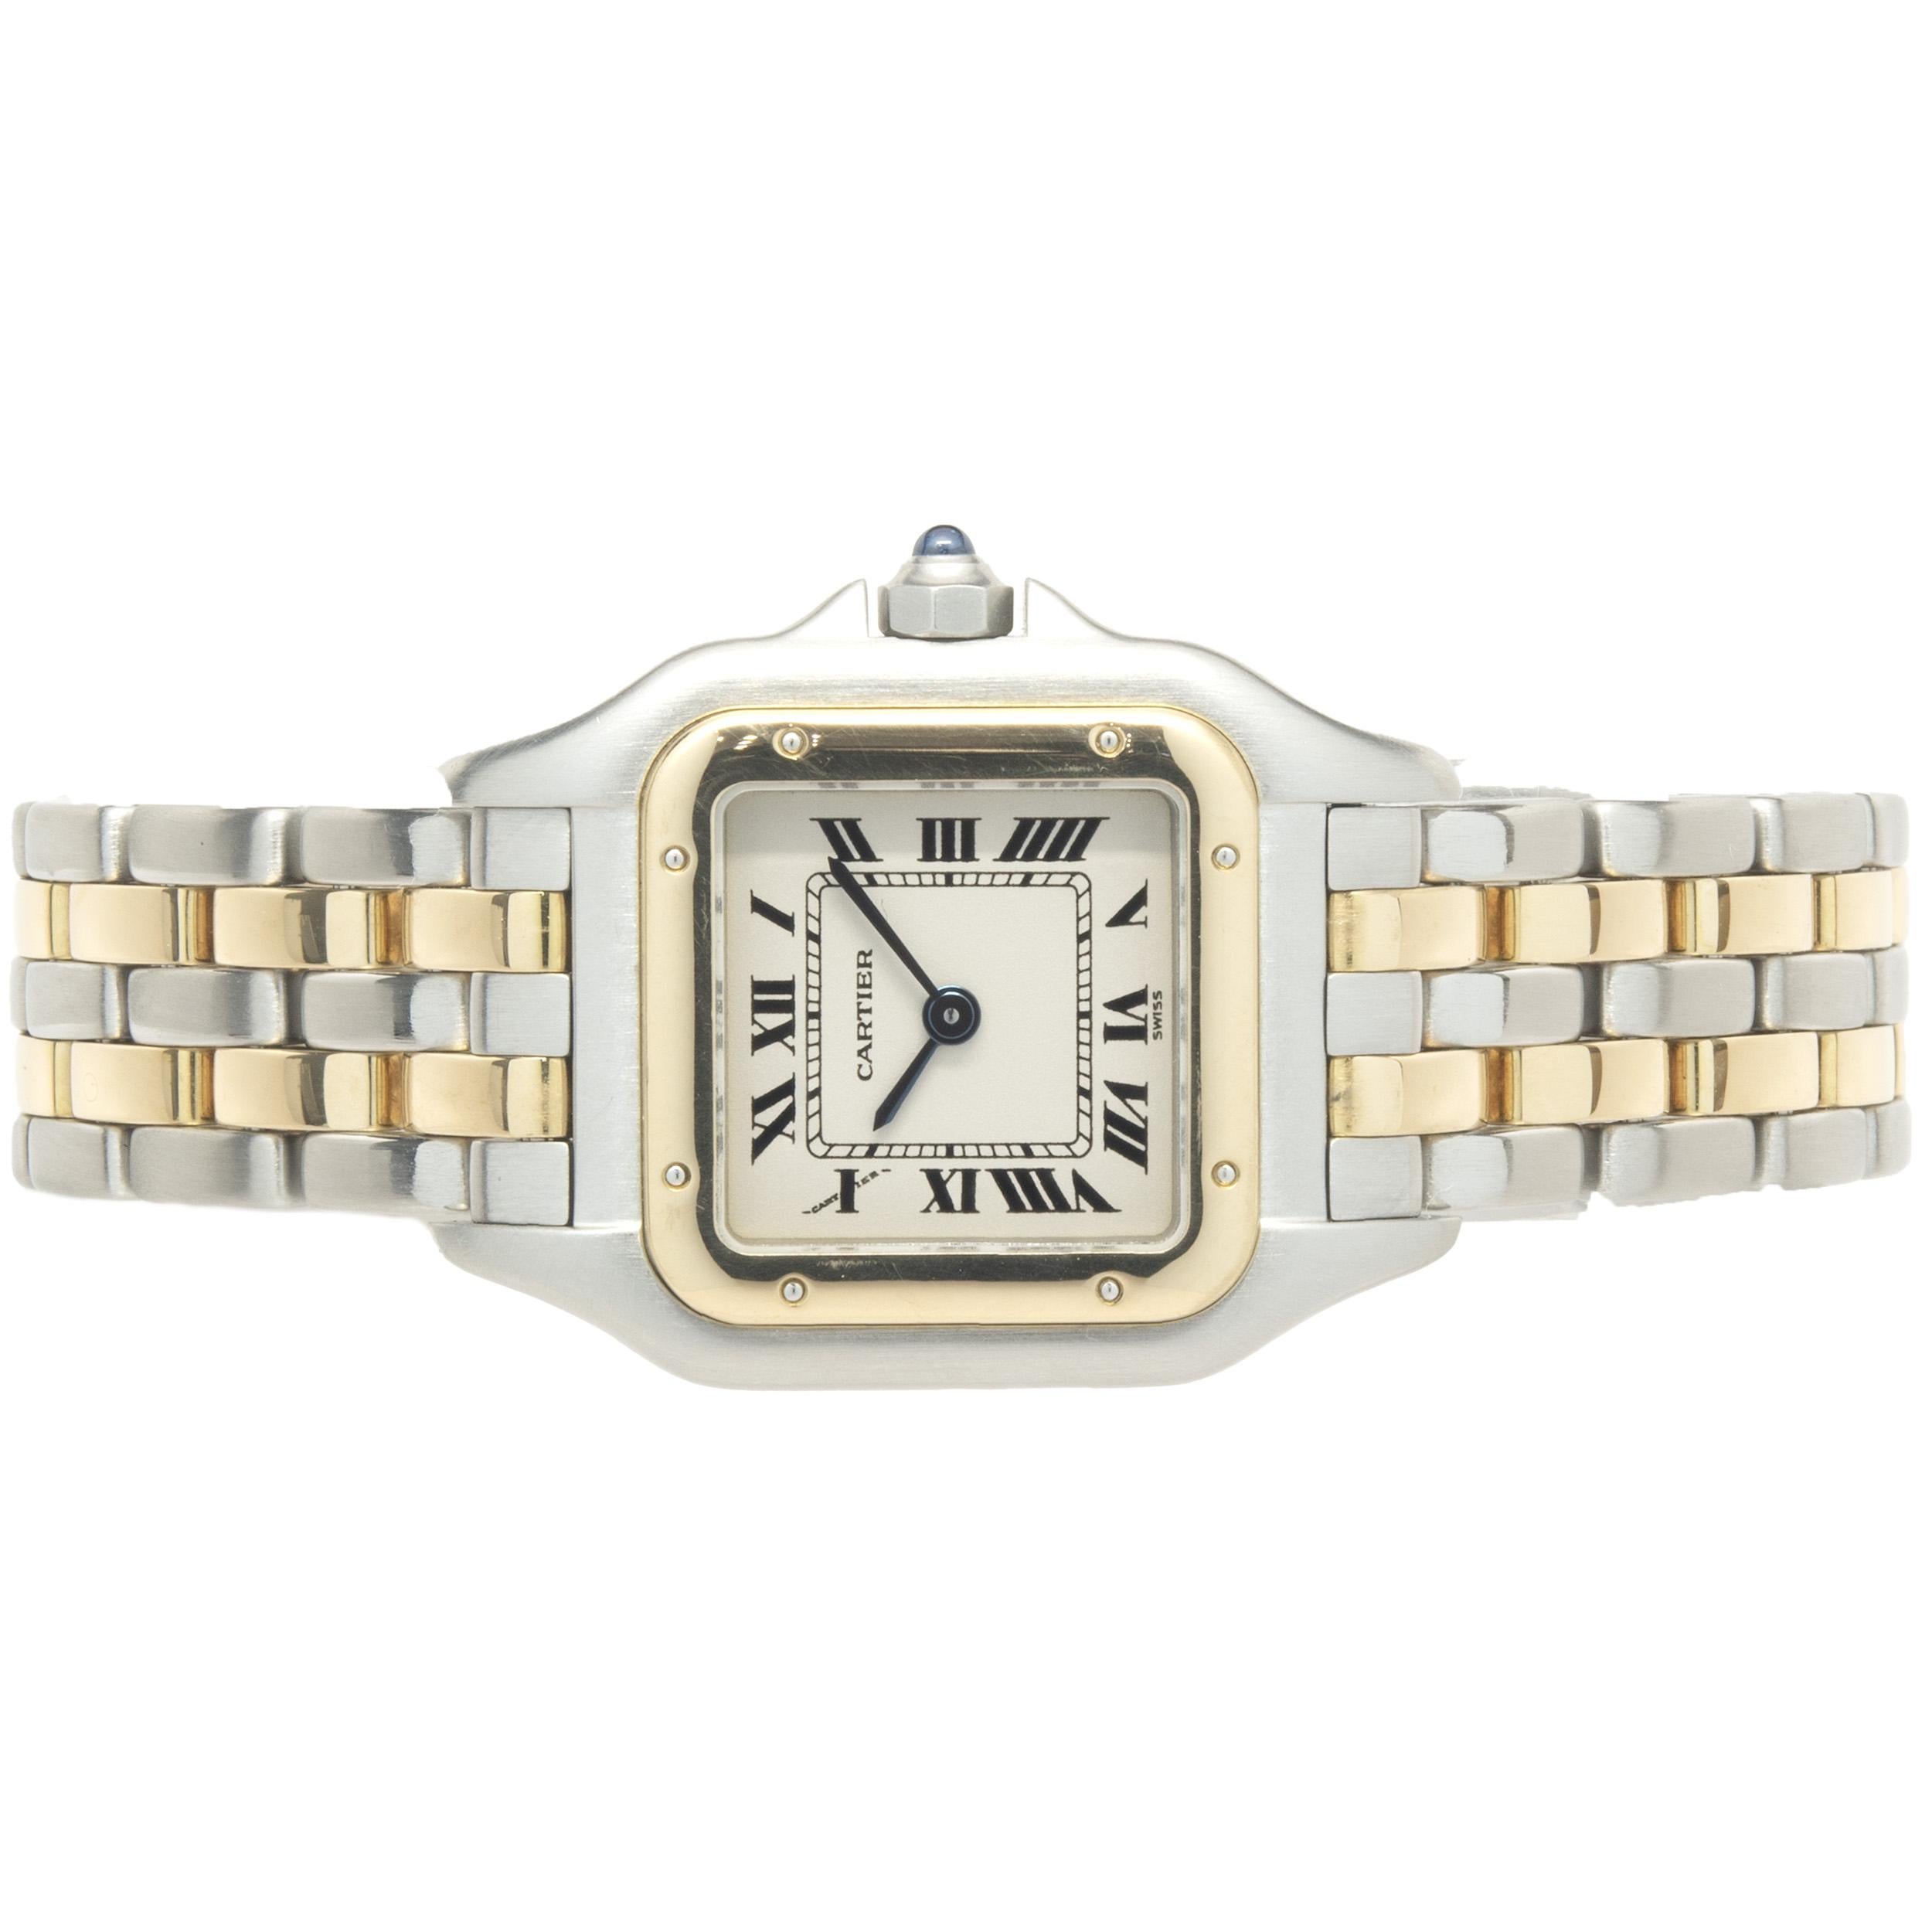 Movement: quartz
Function: hours, minutes
Case: 30 x 22mm stainless steel case, 18K yellow gold screw bezel, push pull crown, sapphire crystal
Dial: white roman dial, steel sword sweeping hands
Band: Cartier stainless steel & 18K yellow gold panther